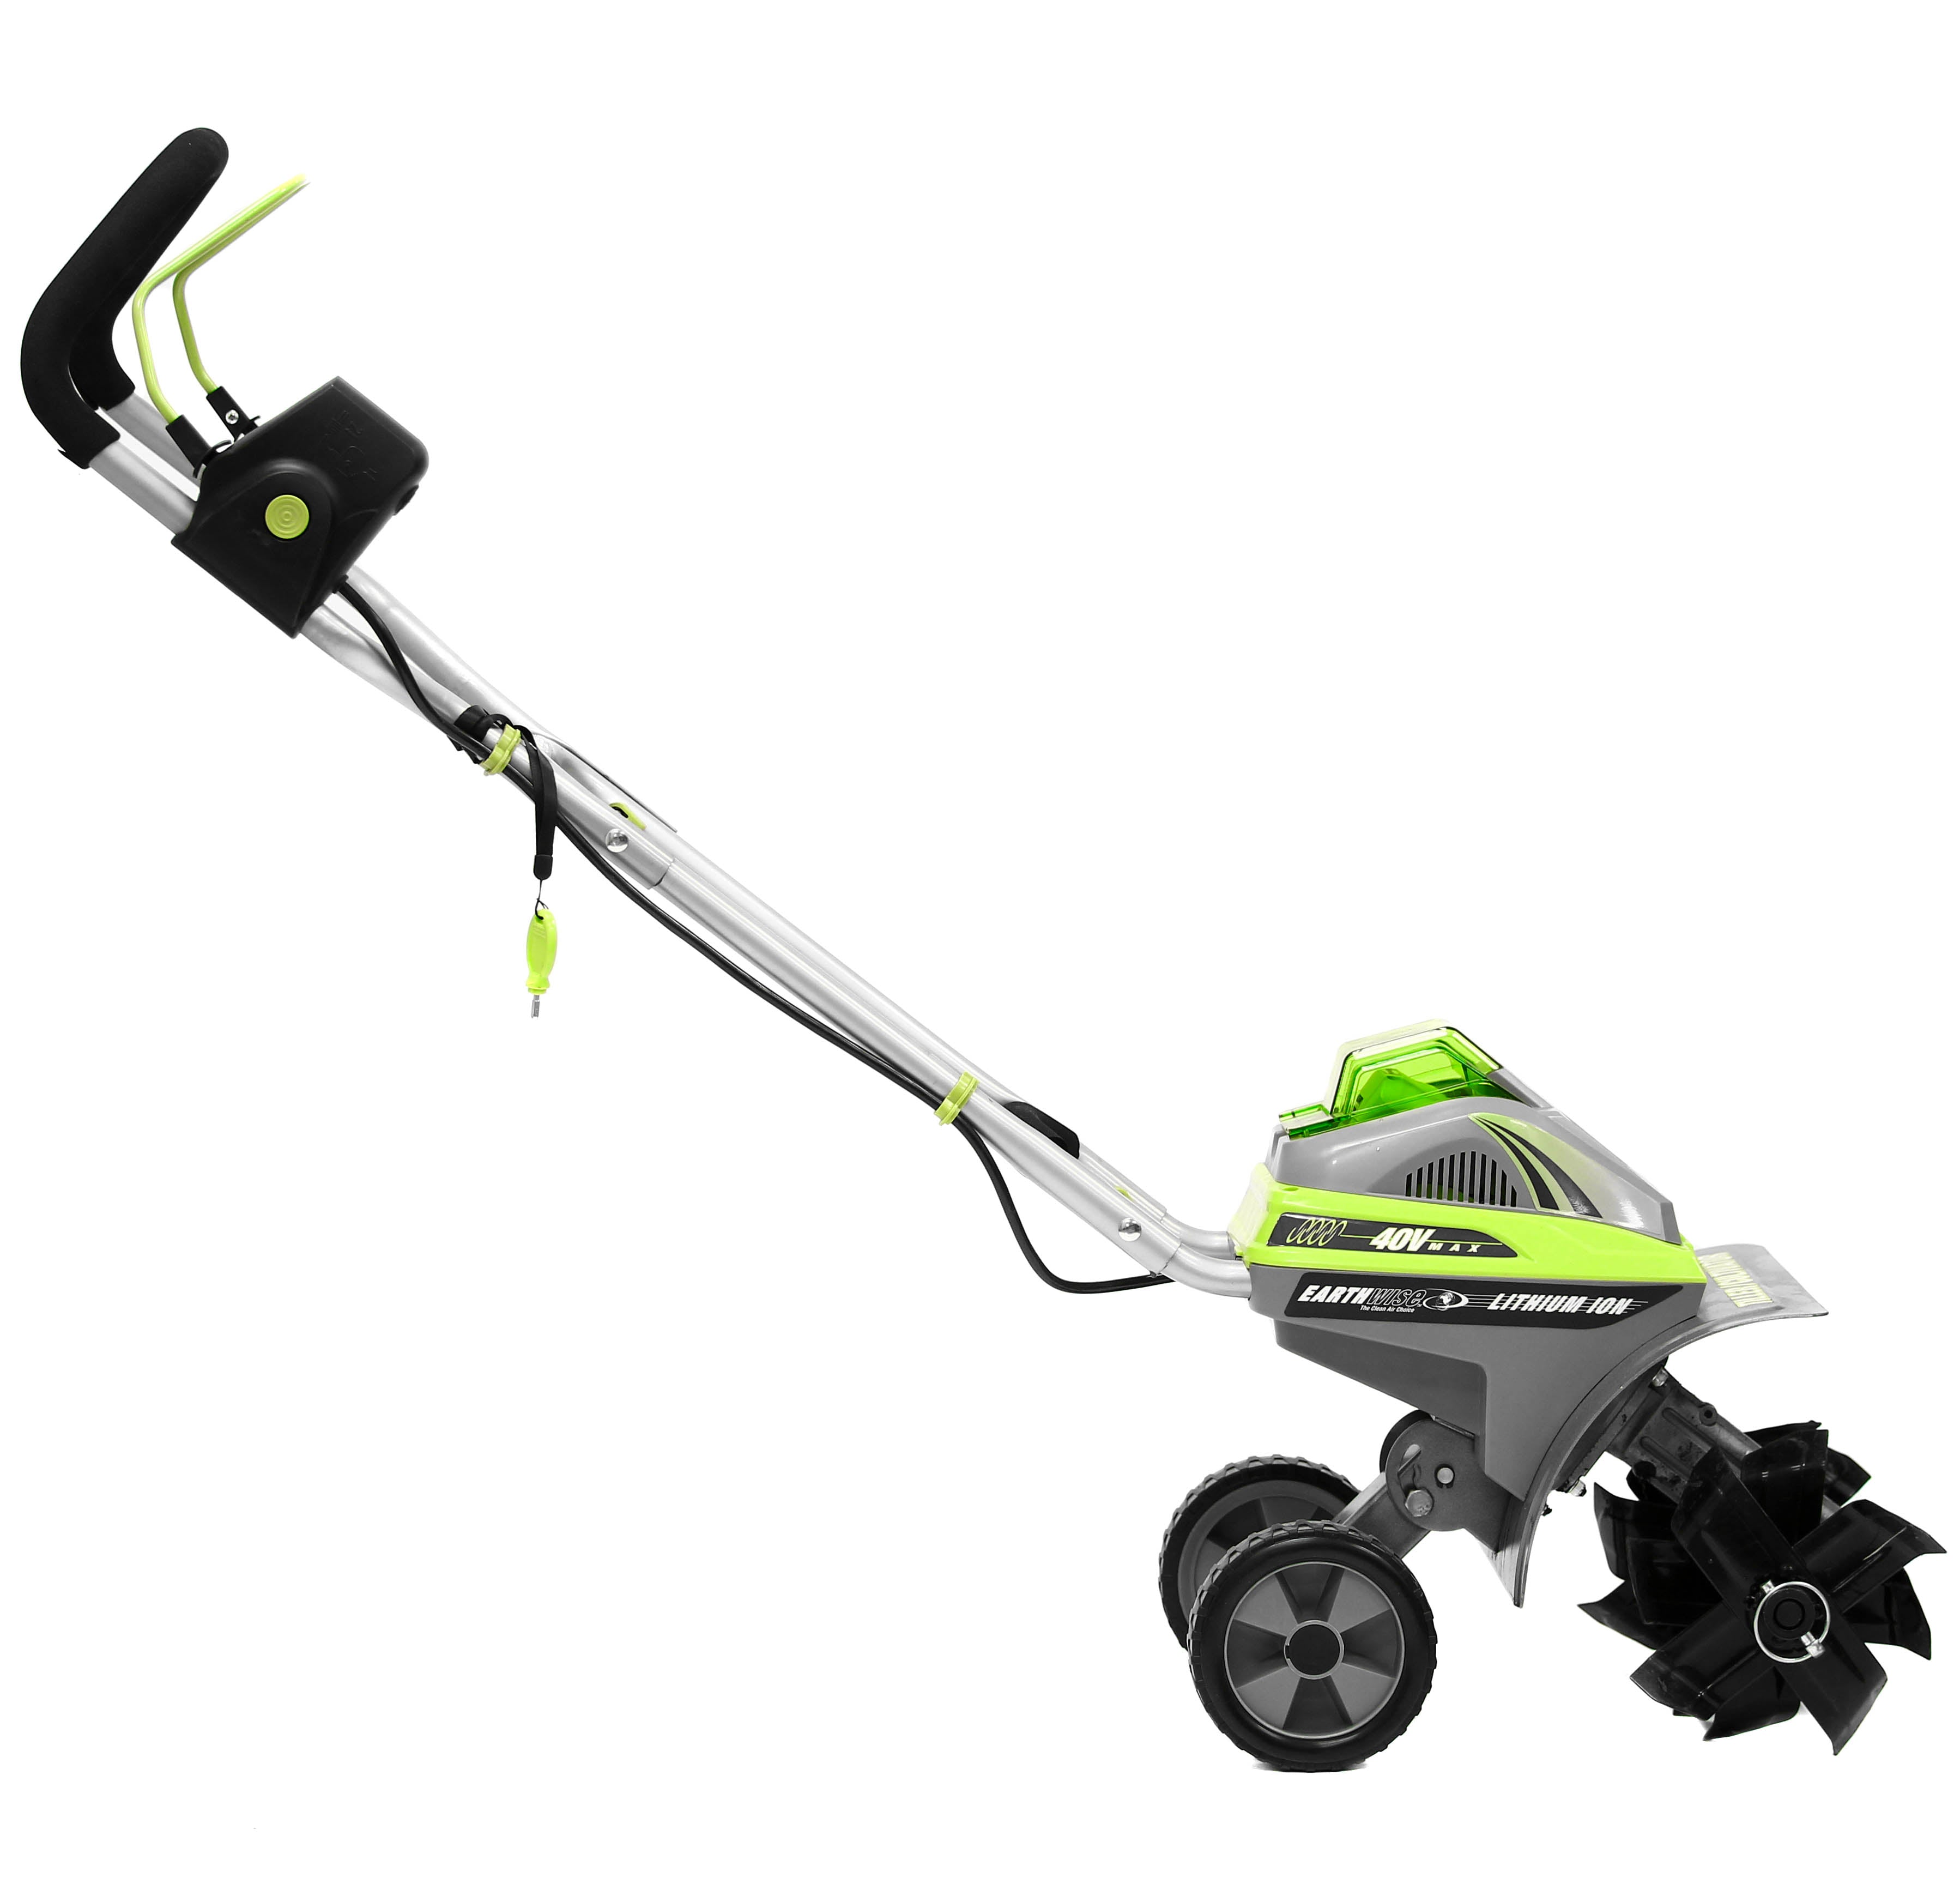 Earthwise Power Tools by ALM 11" 40V 4Ah Lithium Tiller/Cultivator